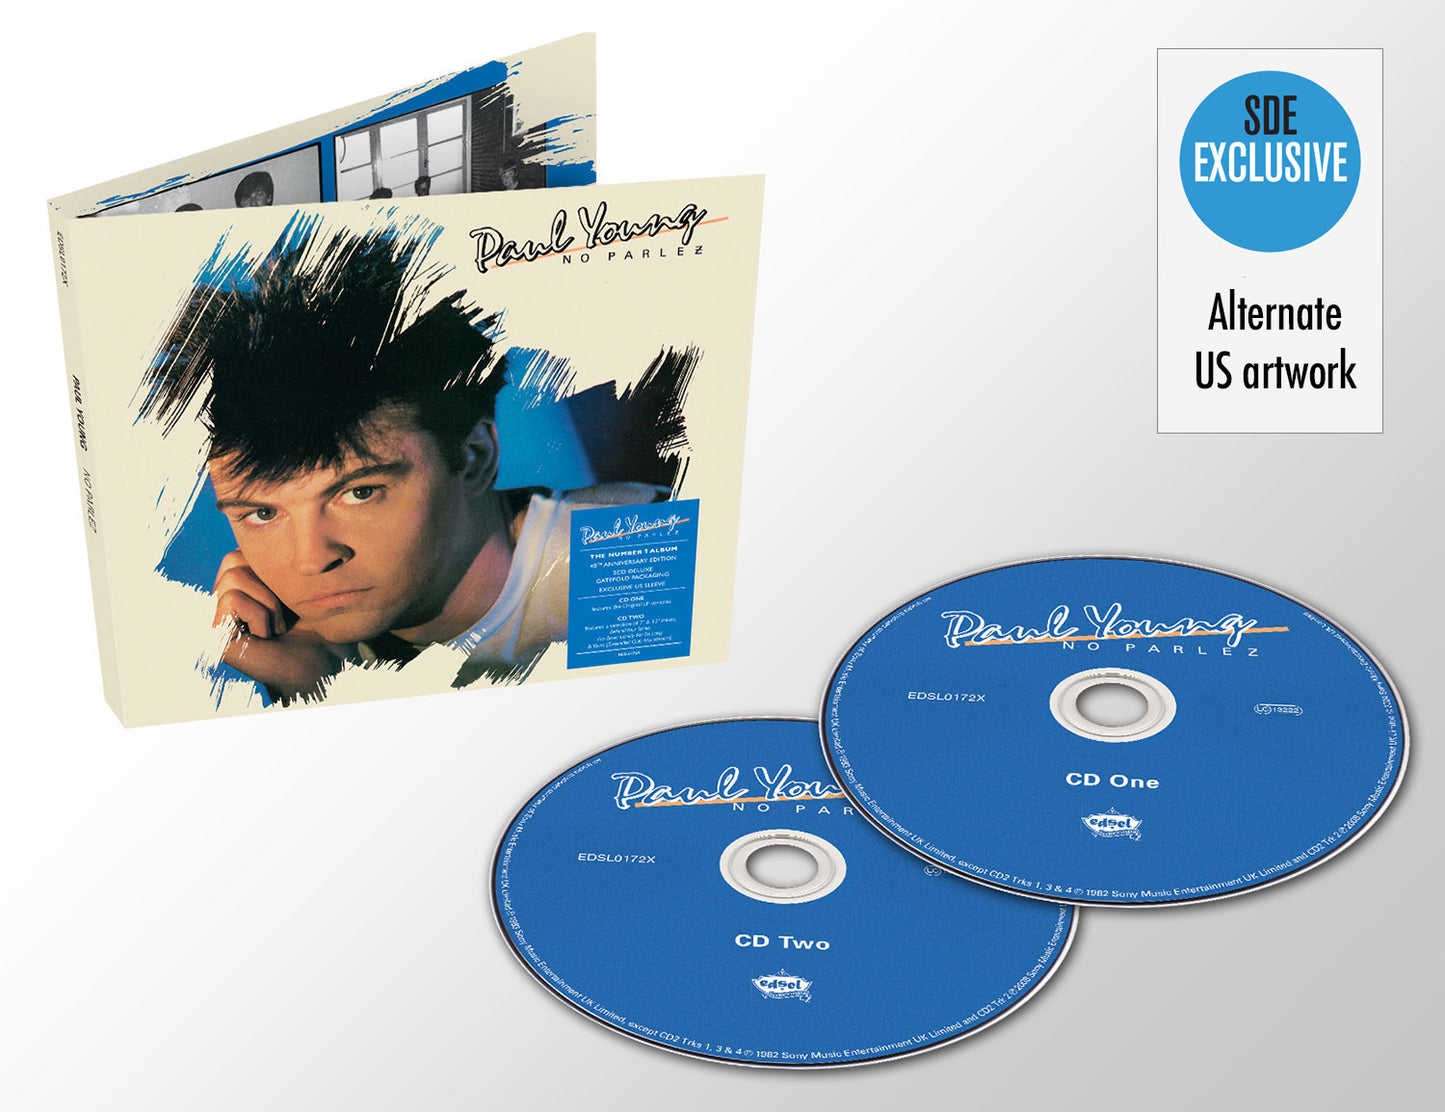 EXCLUSIVE: Paul Young / No Parlez 40th anniversary 2CD set with alternate US artwork